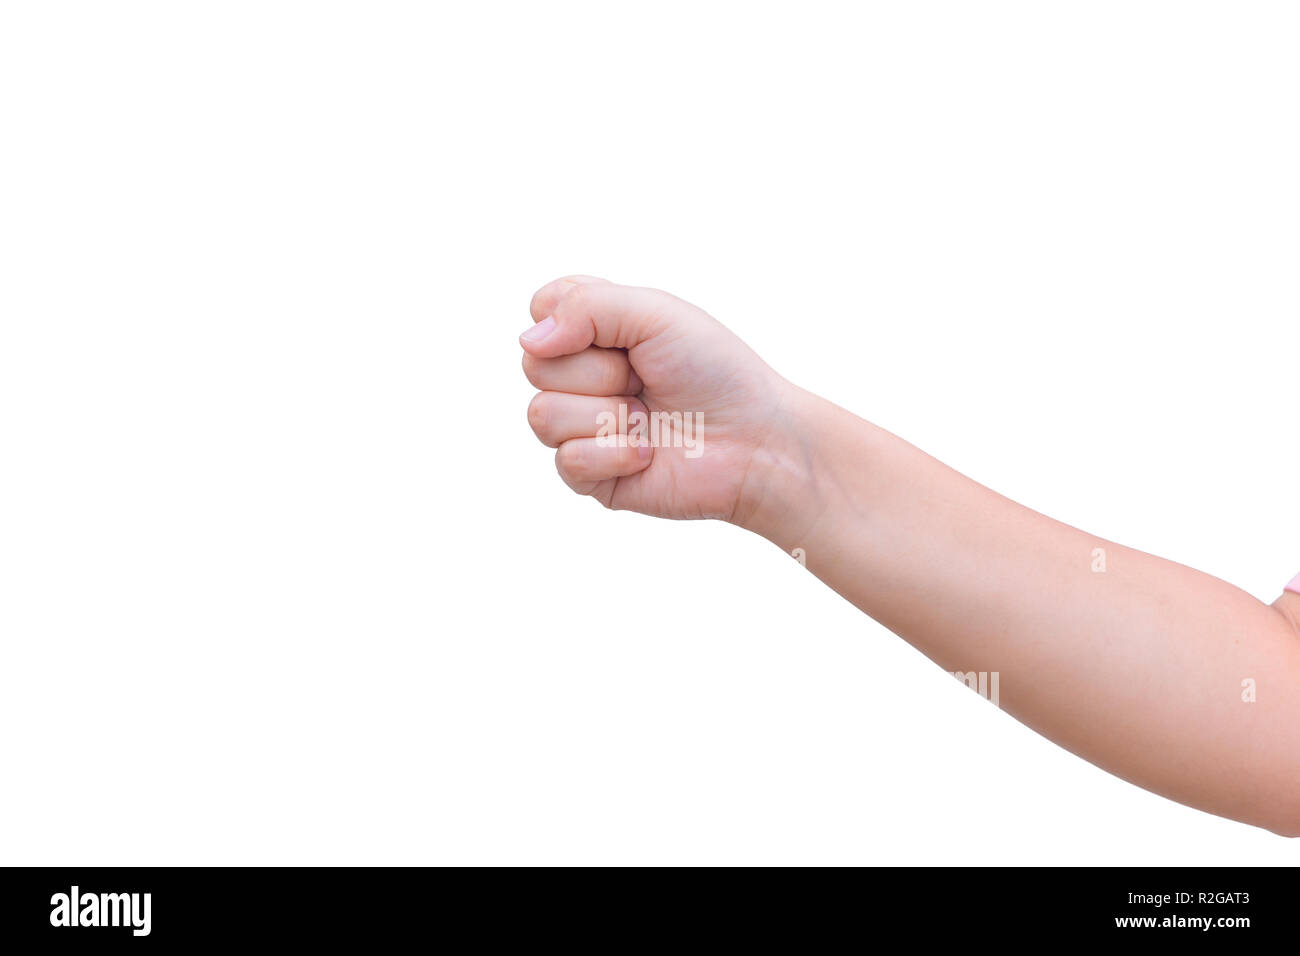 Girl fat hand fist isolated on white background Stock Photo